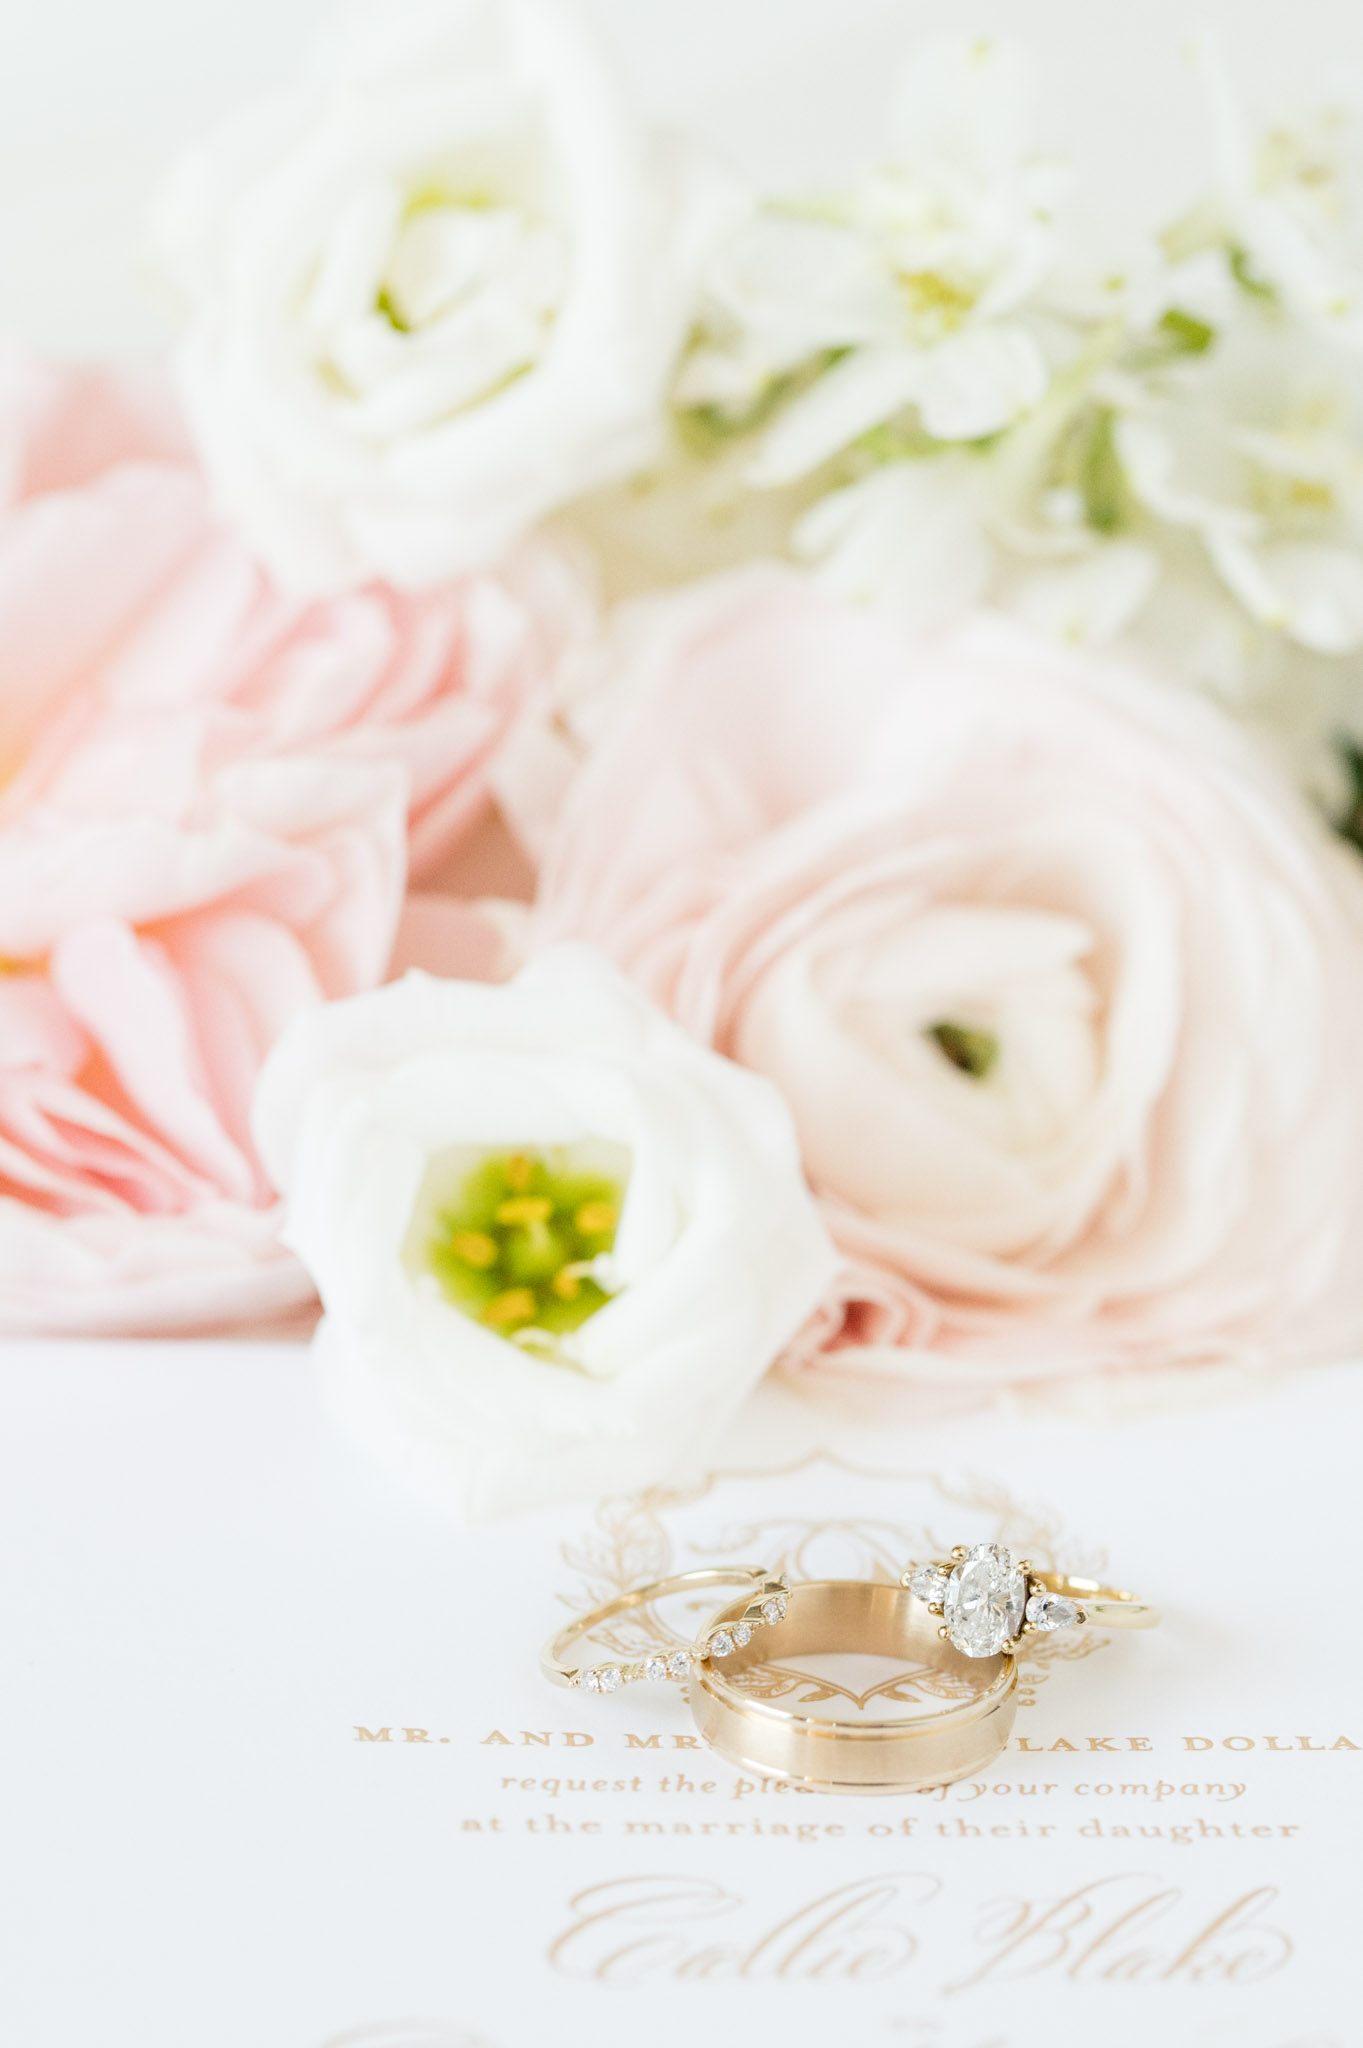 Wedding rings sit with flowers.